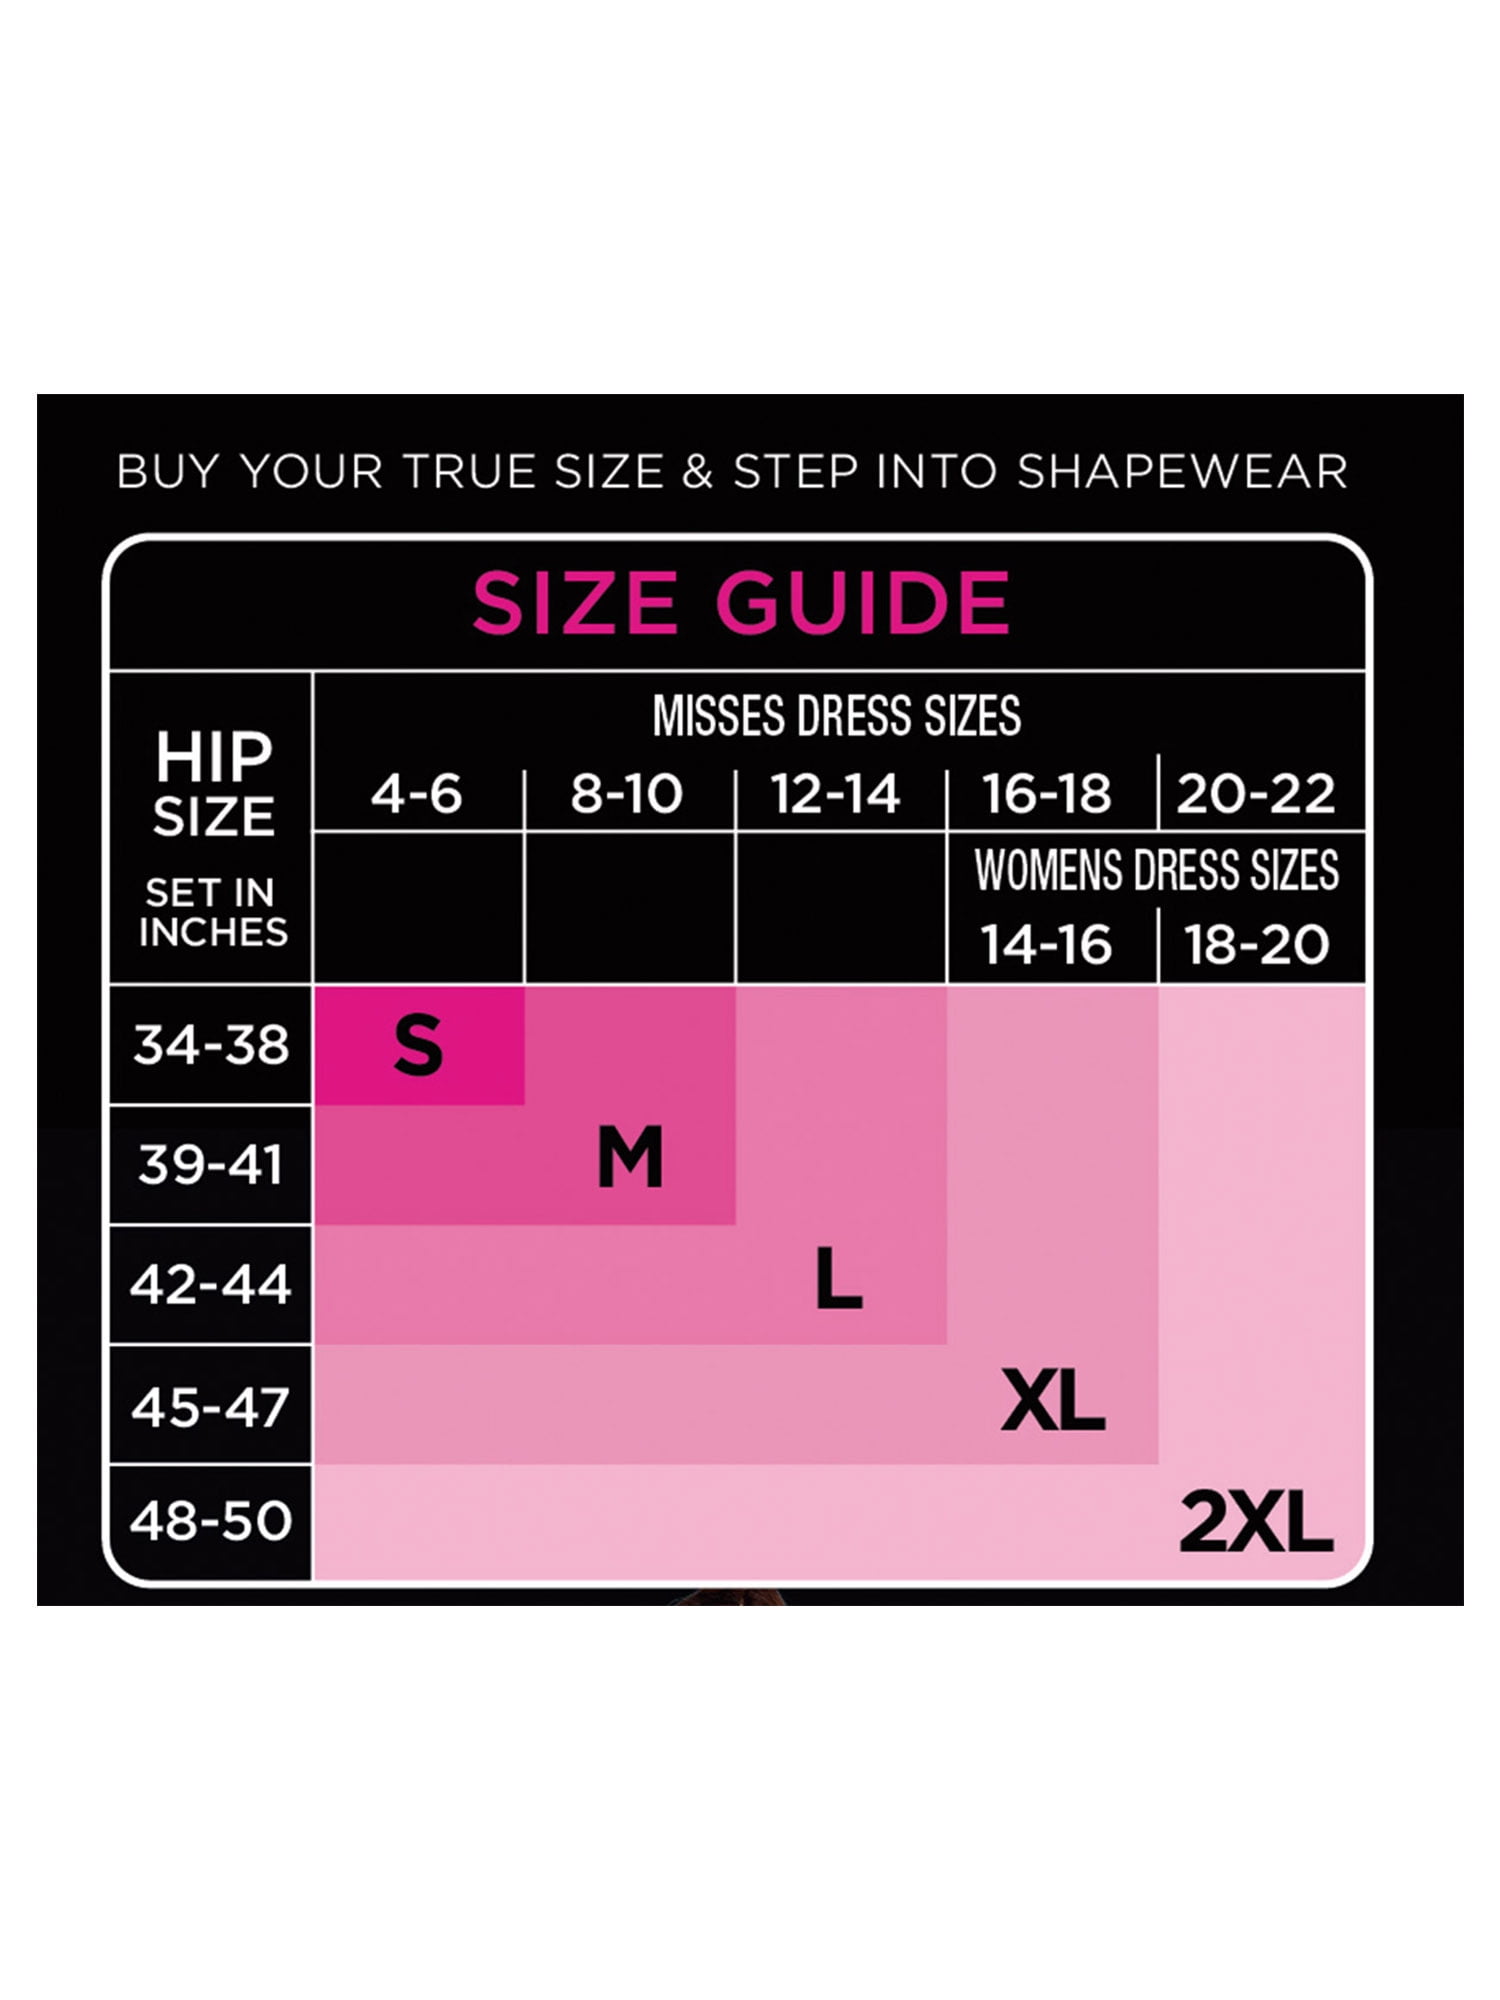 Maidenform Women's Flexees Firm Control Booty Lift Shorty Shapewear, Style  FLS093, Sizes up-to 3XL